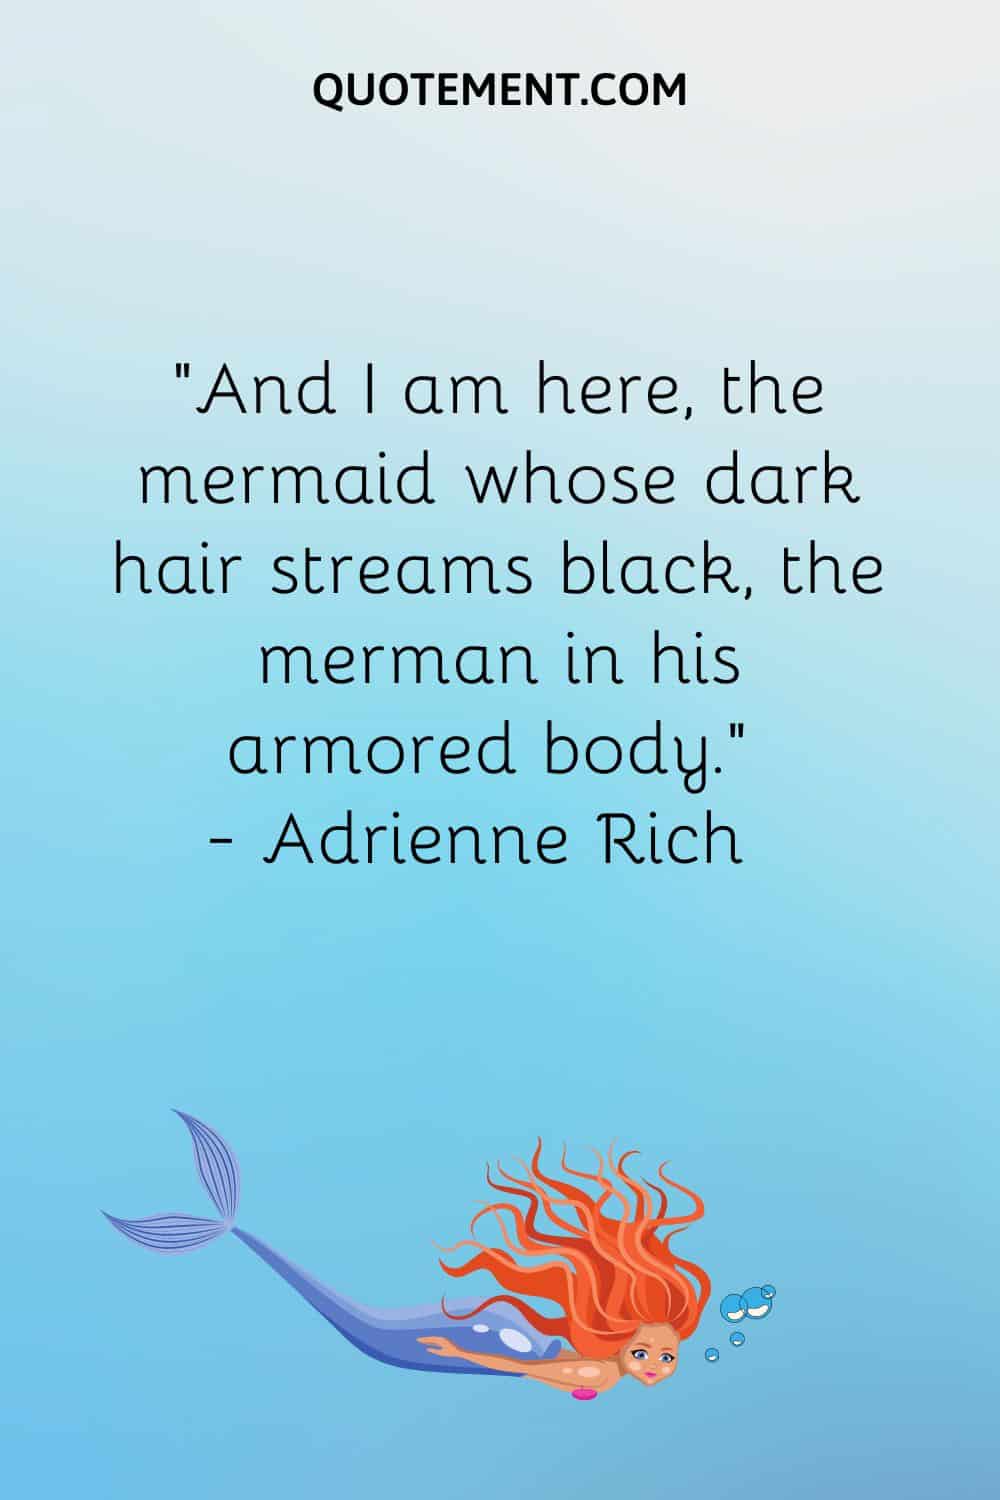 “And I am here, the mermaid whose dark hair streams black, the merman in his armored body.” — Adrienne Rich